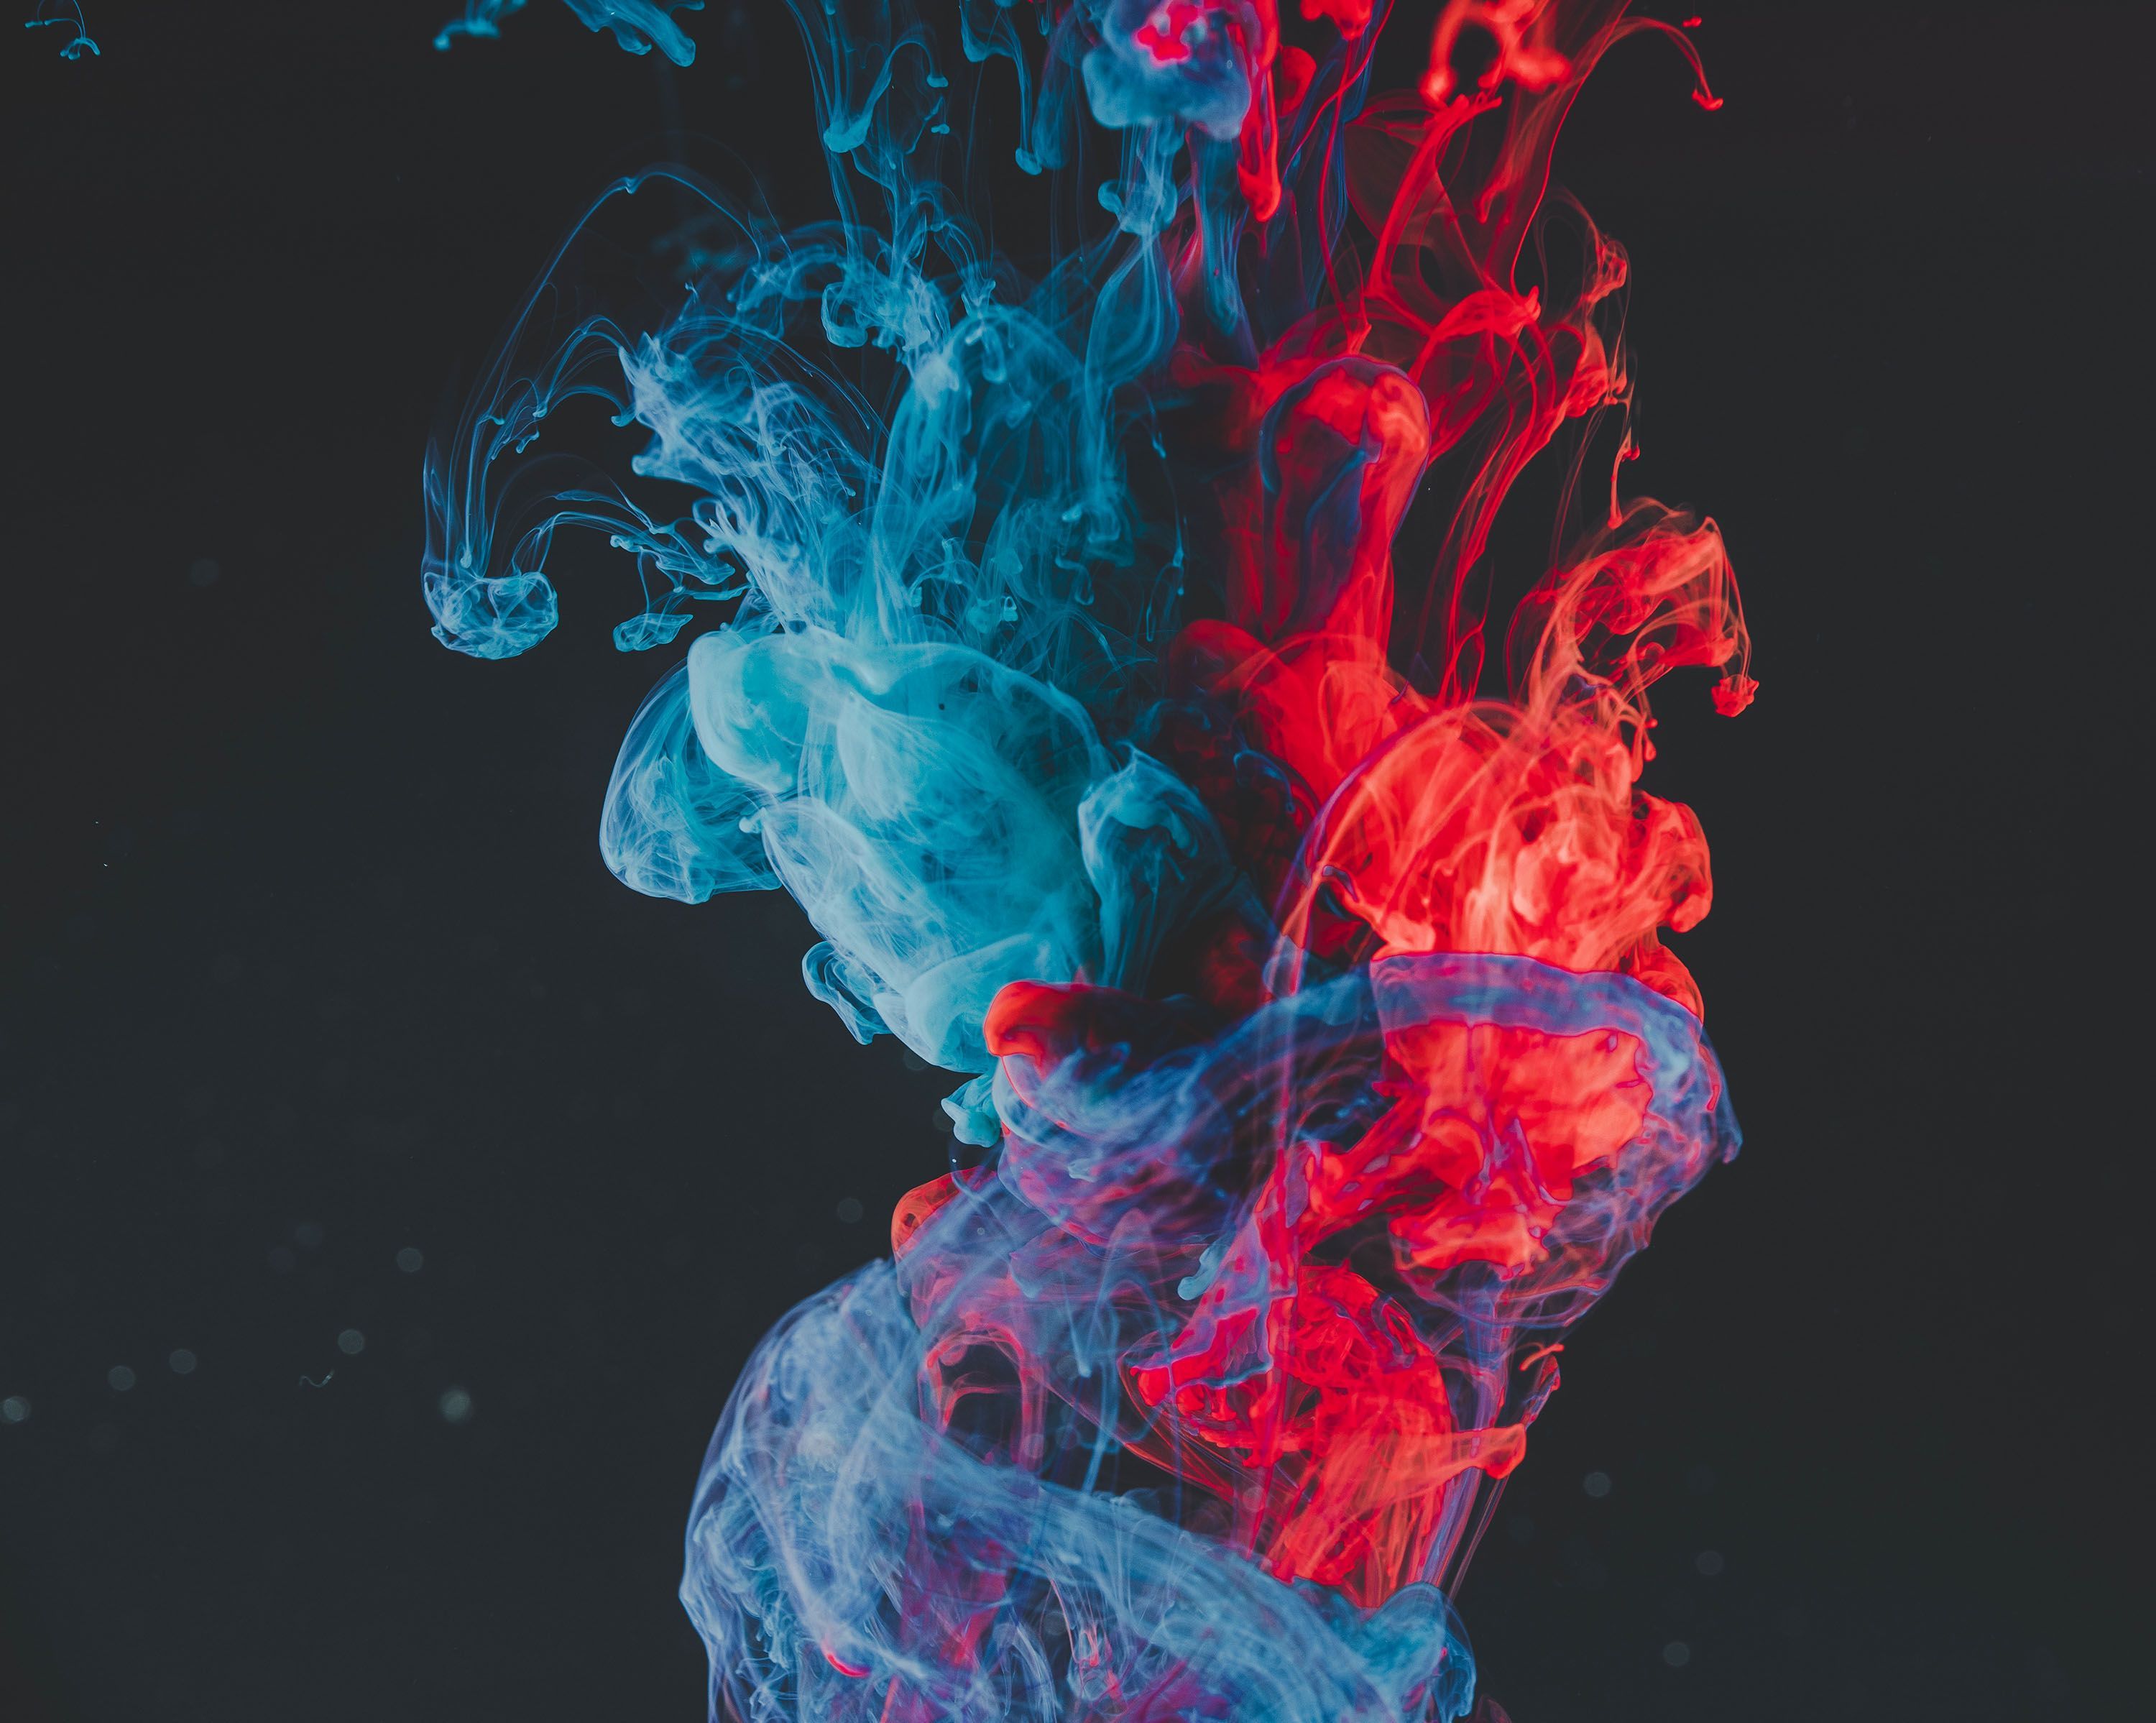 A photo of red and blue ink mixing in water. - Smoke